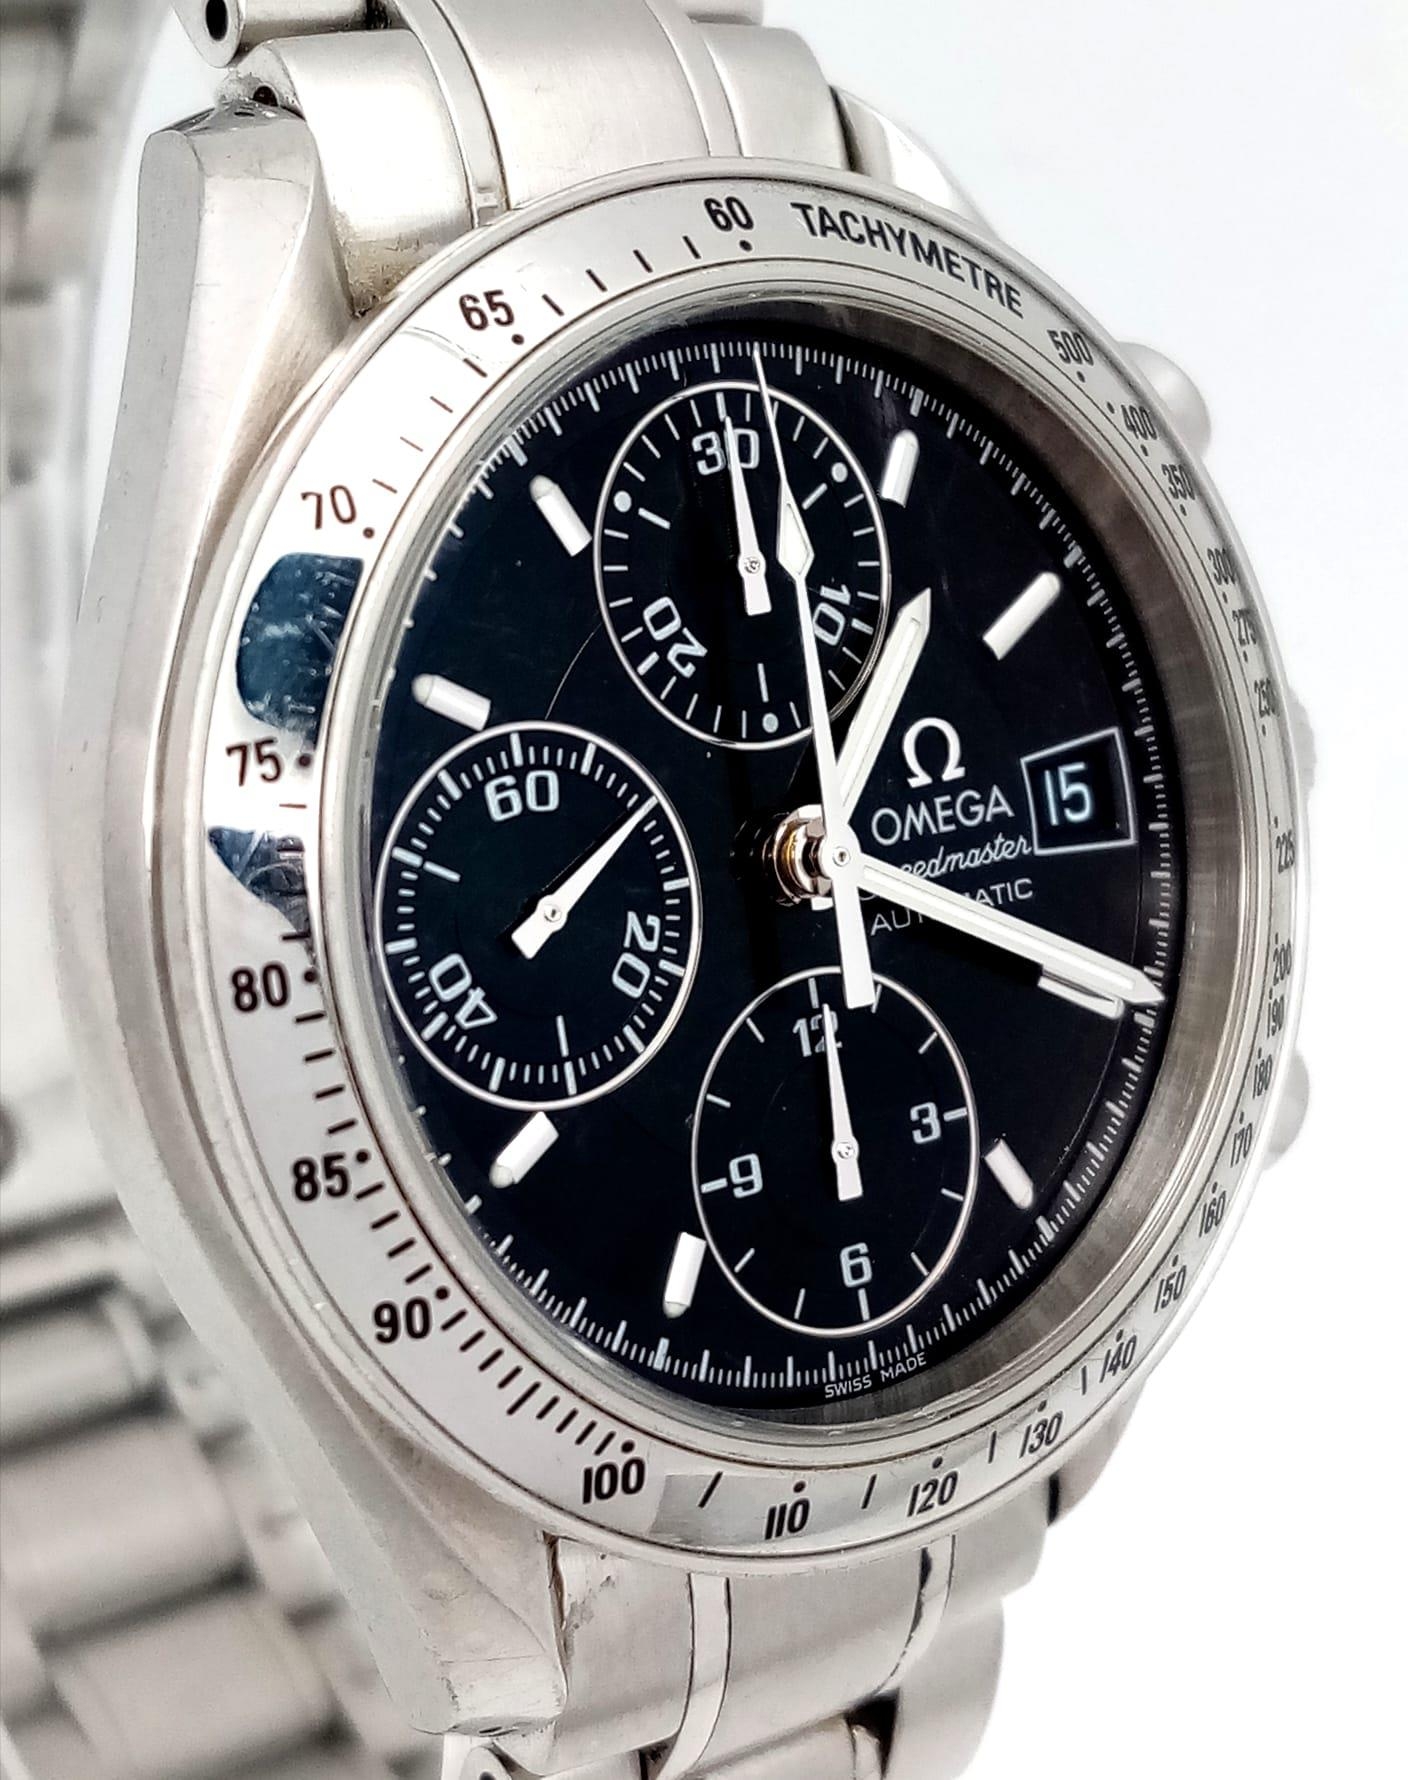 AN OMEGA "SPEEDMASTER" AUTOMATIC WATCH WITH 3 SUBDIALS , DATE BOX AND BLACK DIAL ALL SET IN - Image 2 of 9